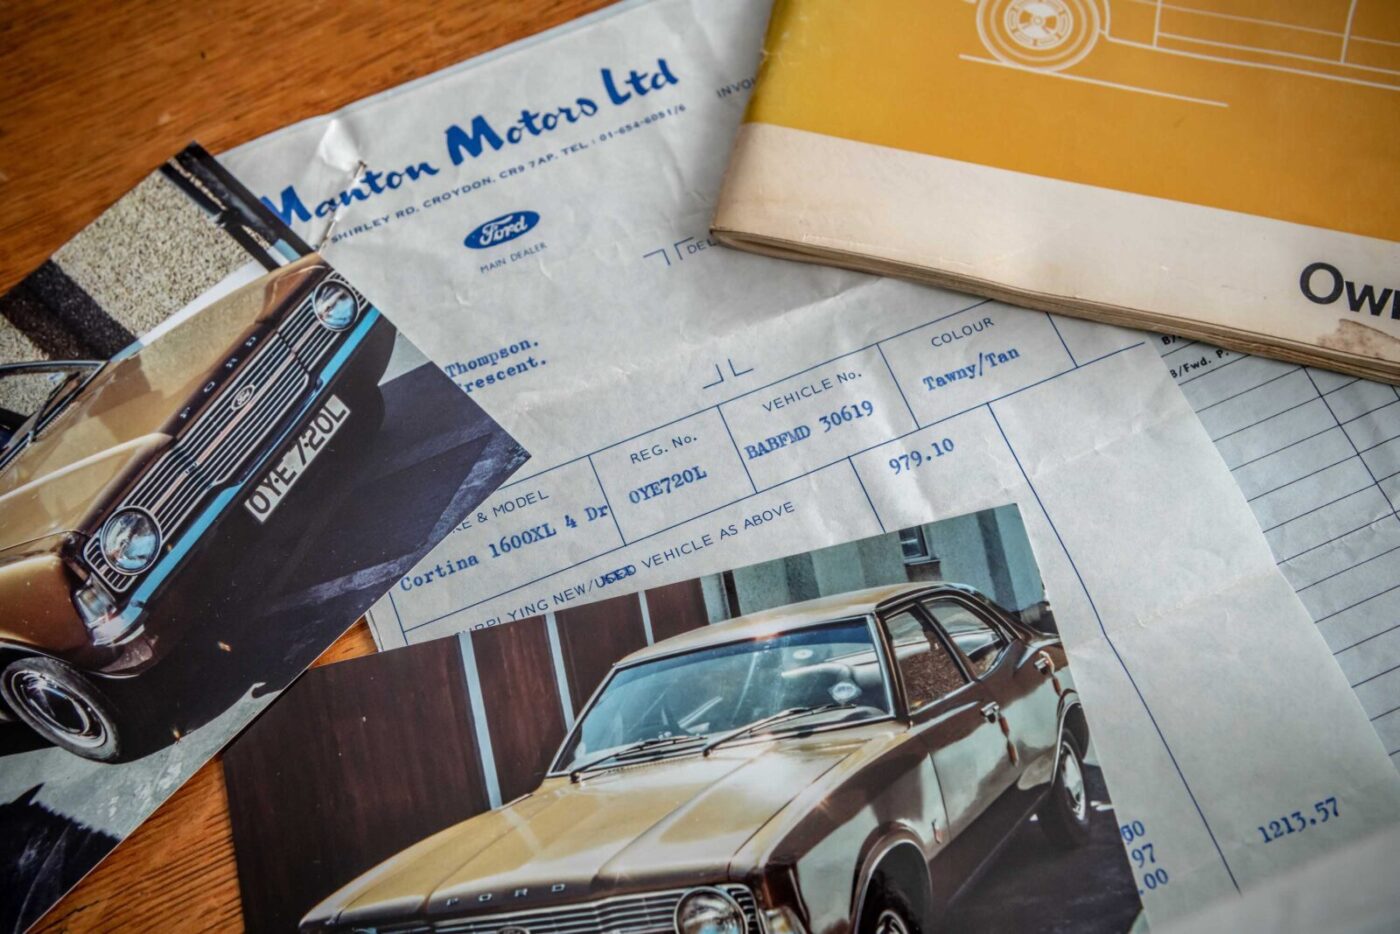 Ford Cortina XL owners manual